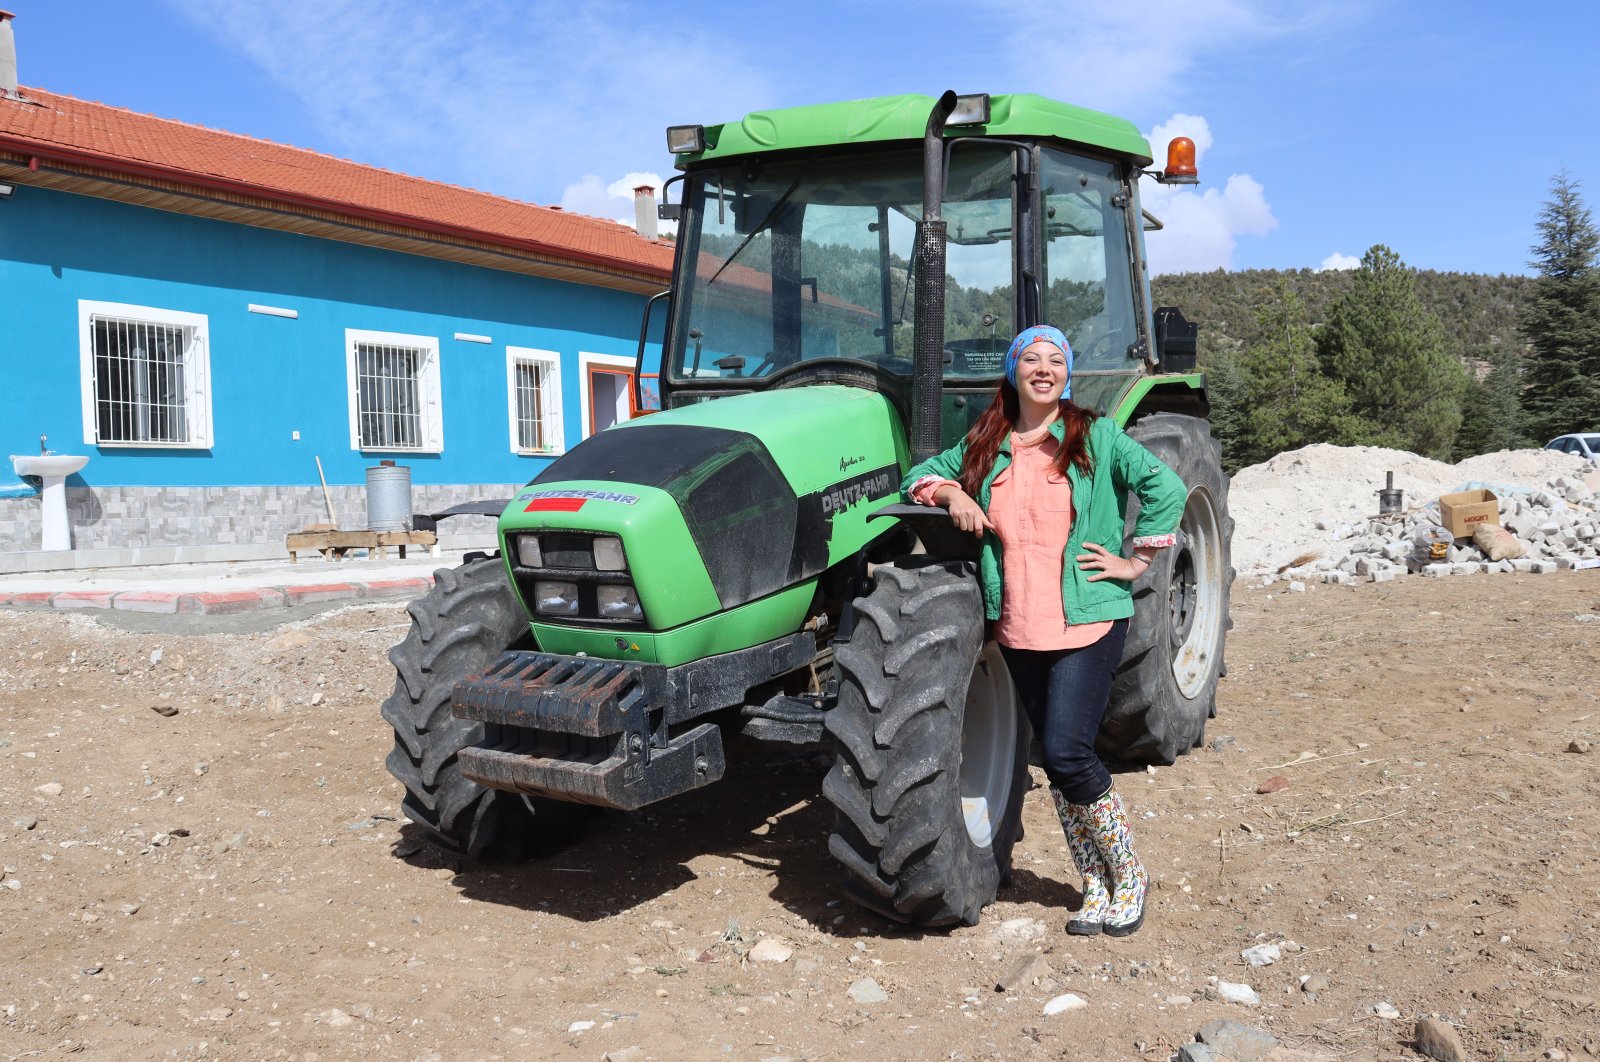 Aynur Onur poses for a photo near her tractor in her hometown Burdur, southwestern Turkey, Nov. 27, 2020. (AA Photo)